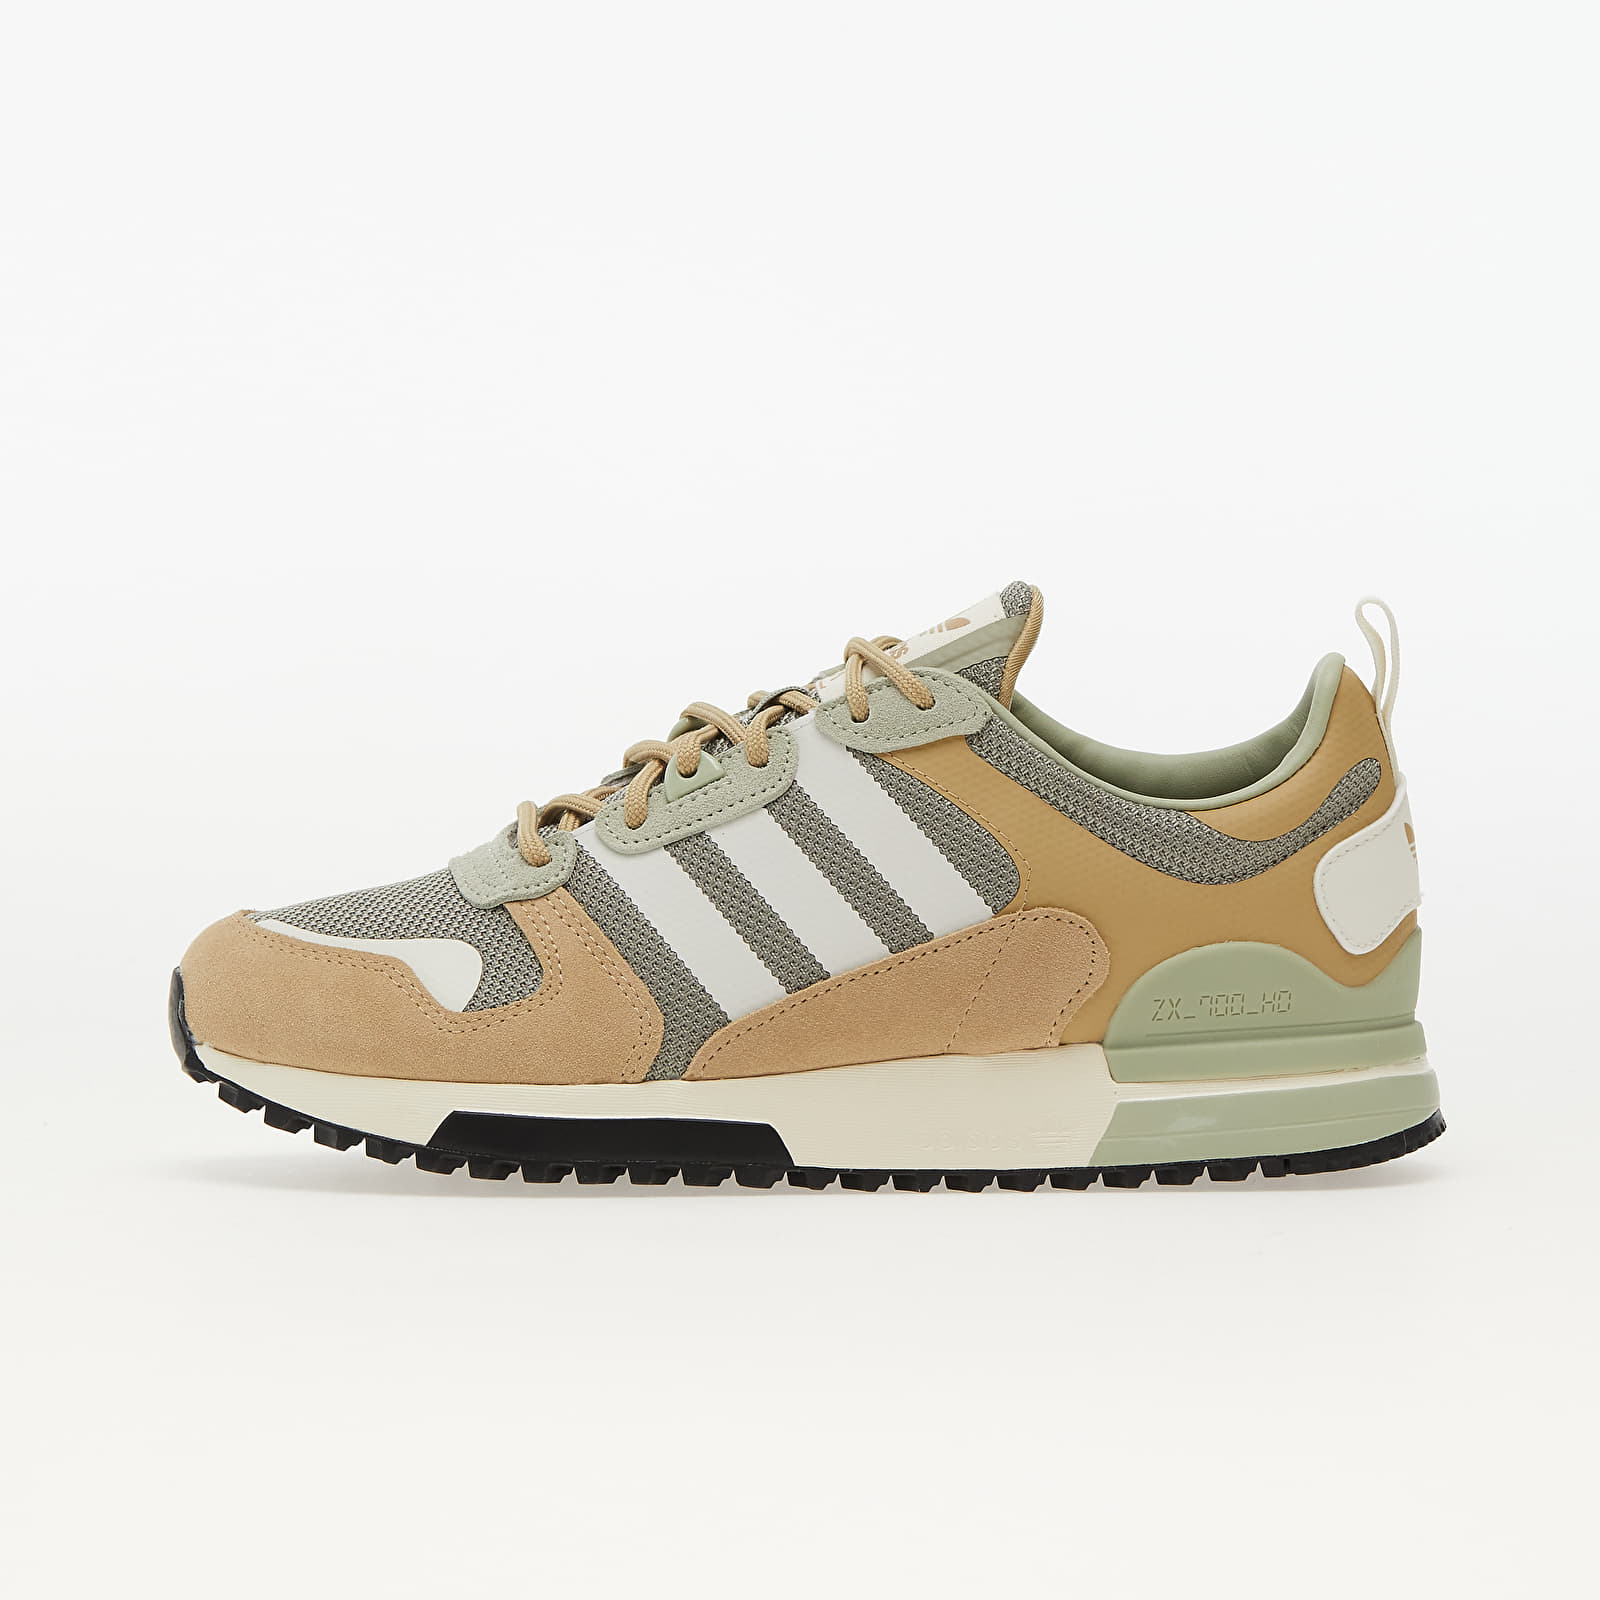 Chaussures et baskets homme adidas ZX 700 HD Beige Tone/ Off White/ Feather Grey